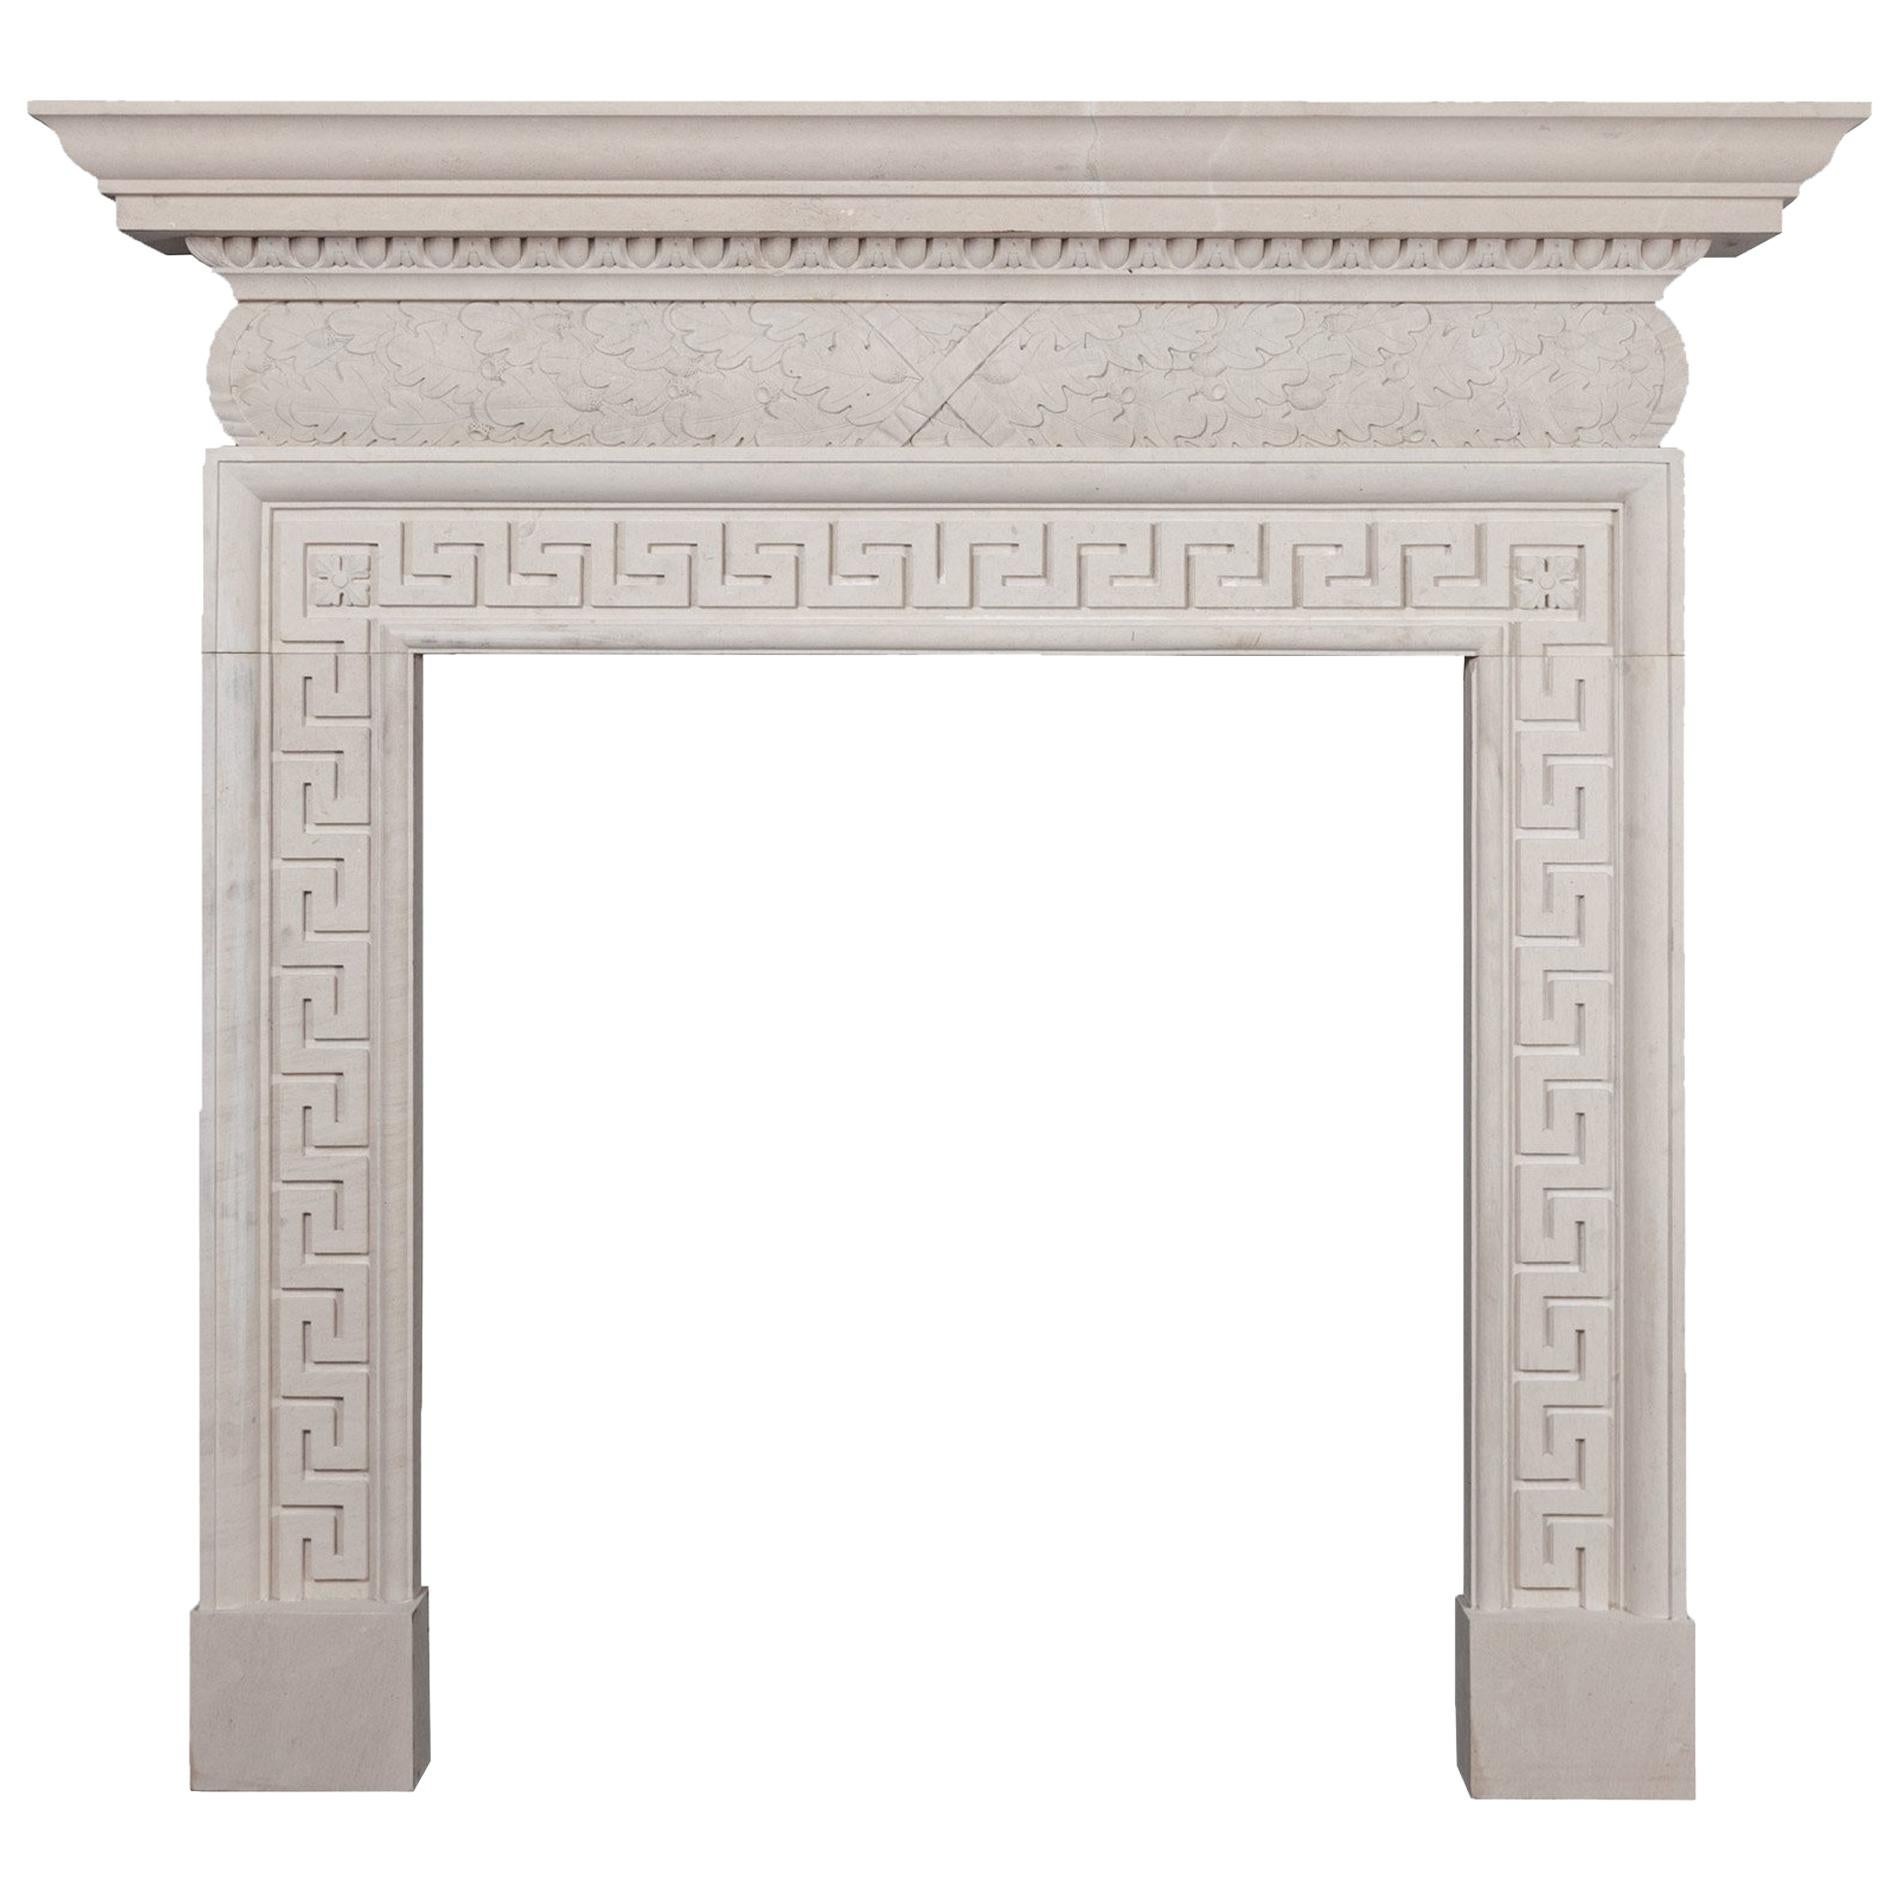 Ryan & Smith Lissadel Hand-Carved English Portland Stone Fireplace For Sale